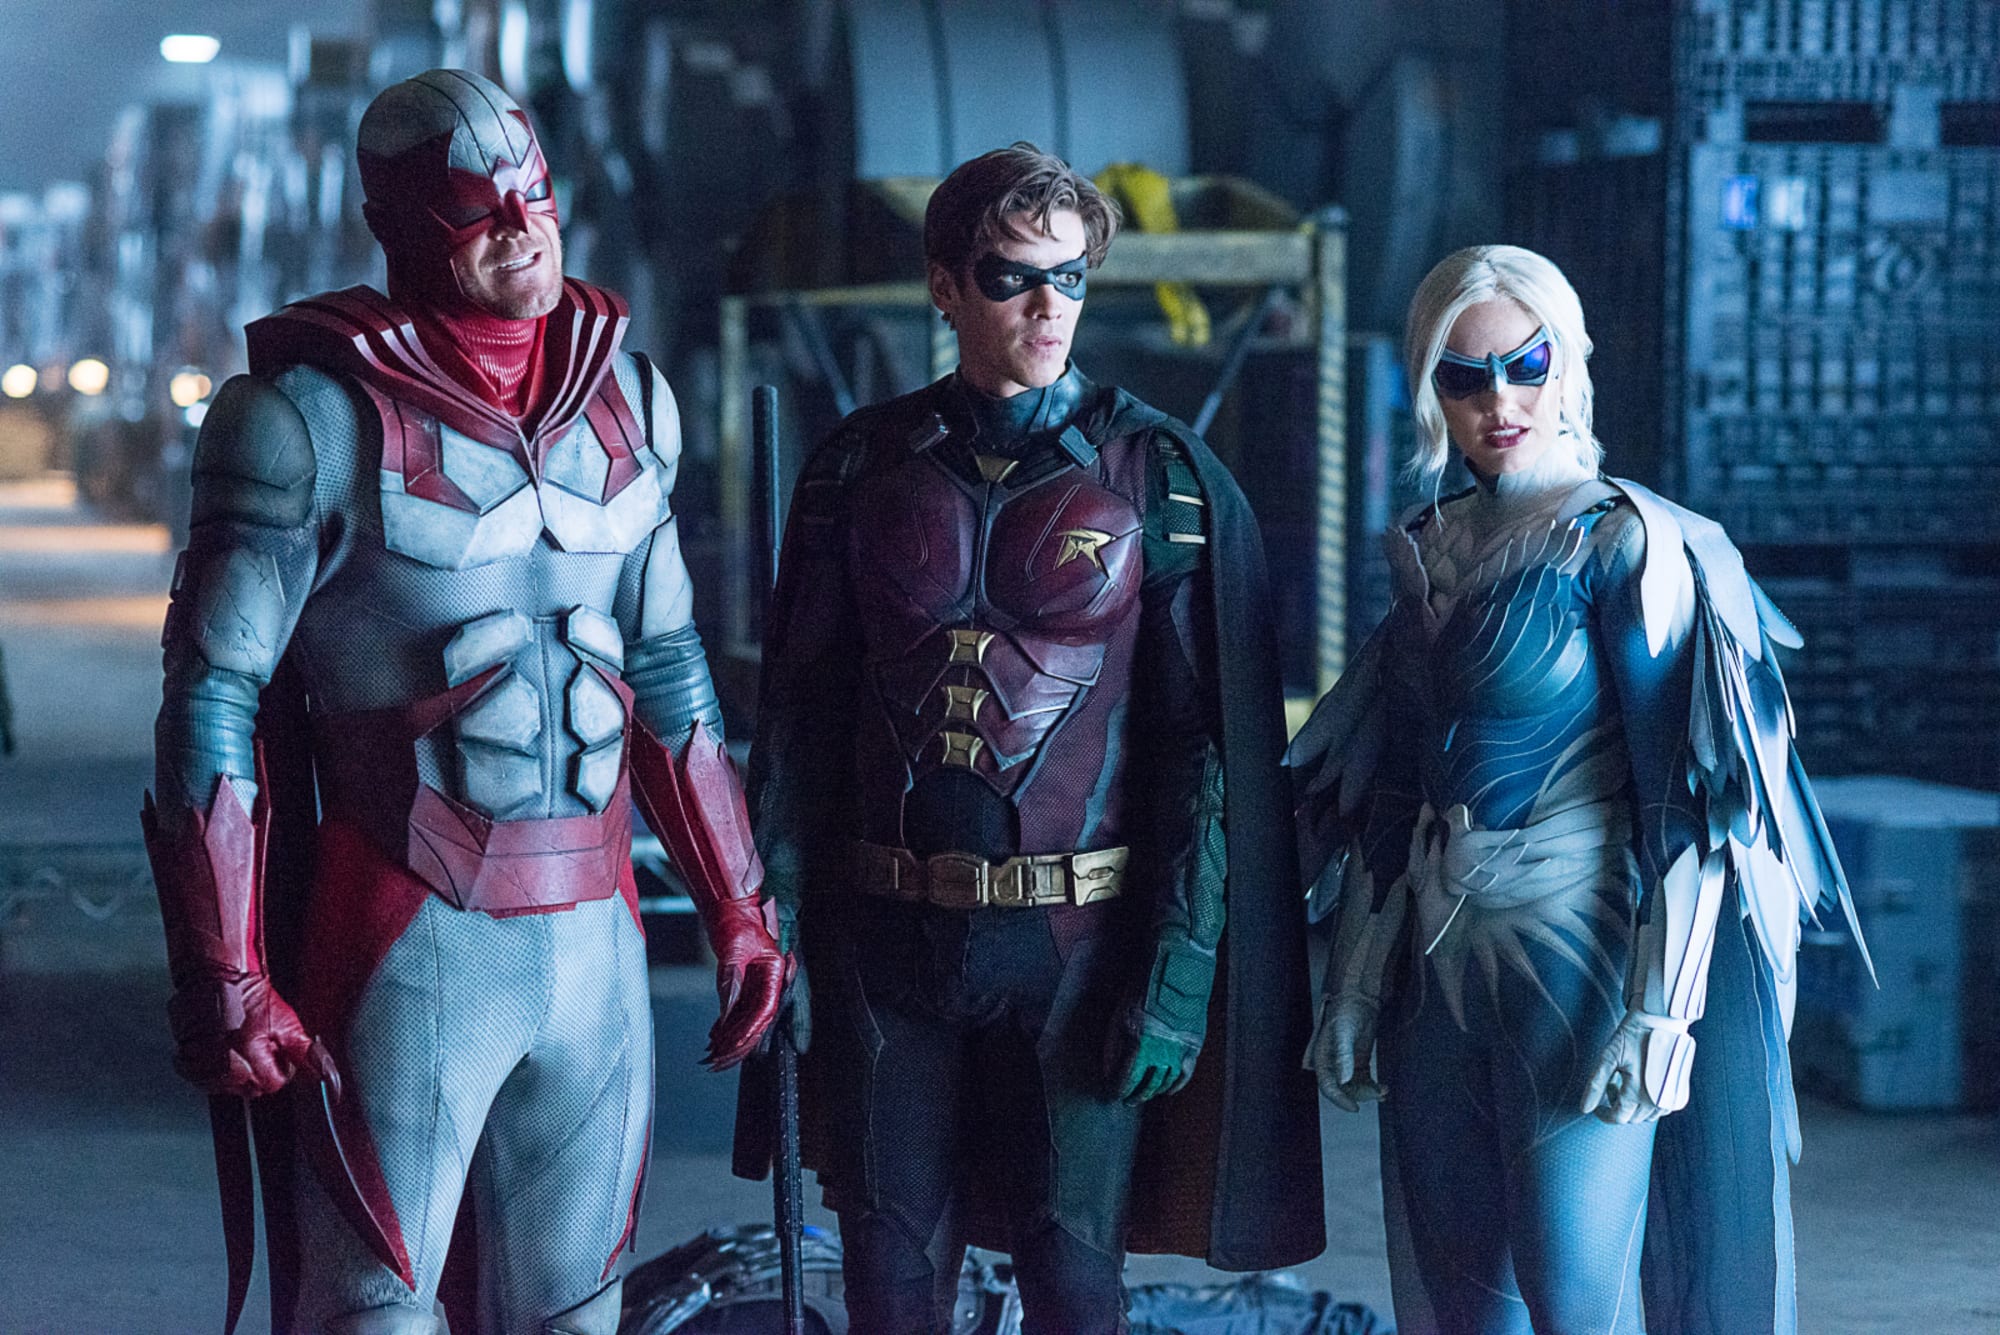 DC Universe’s Titans has officially been renewed for a third season!